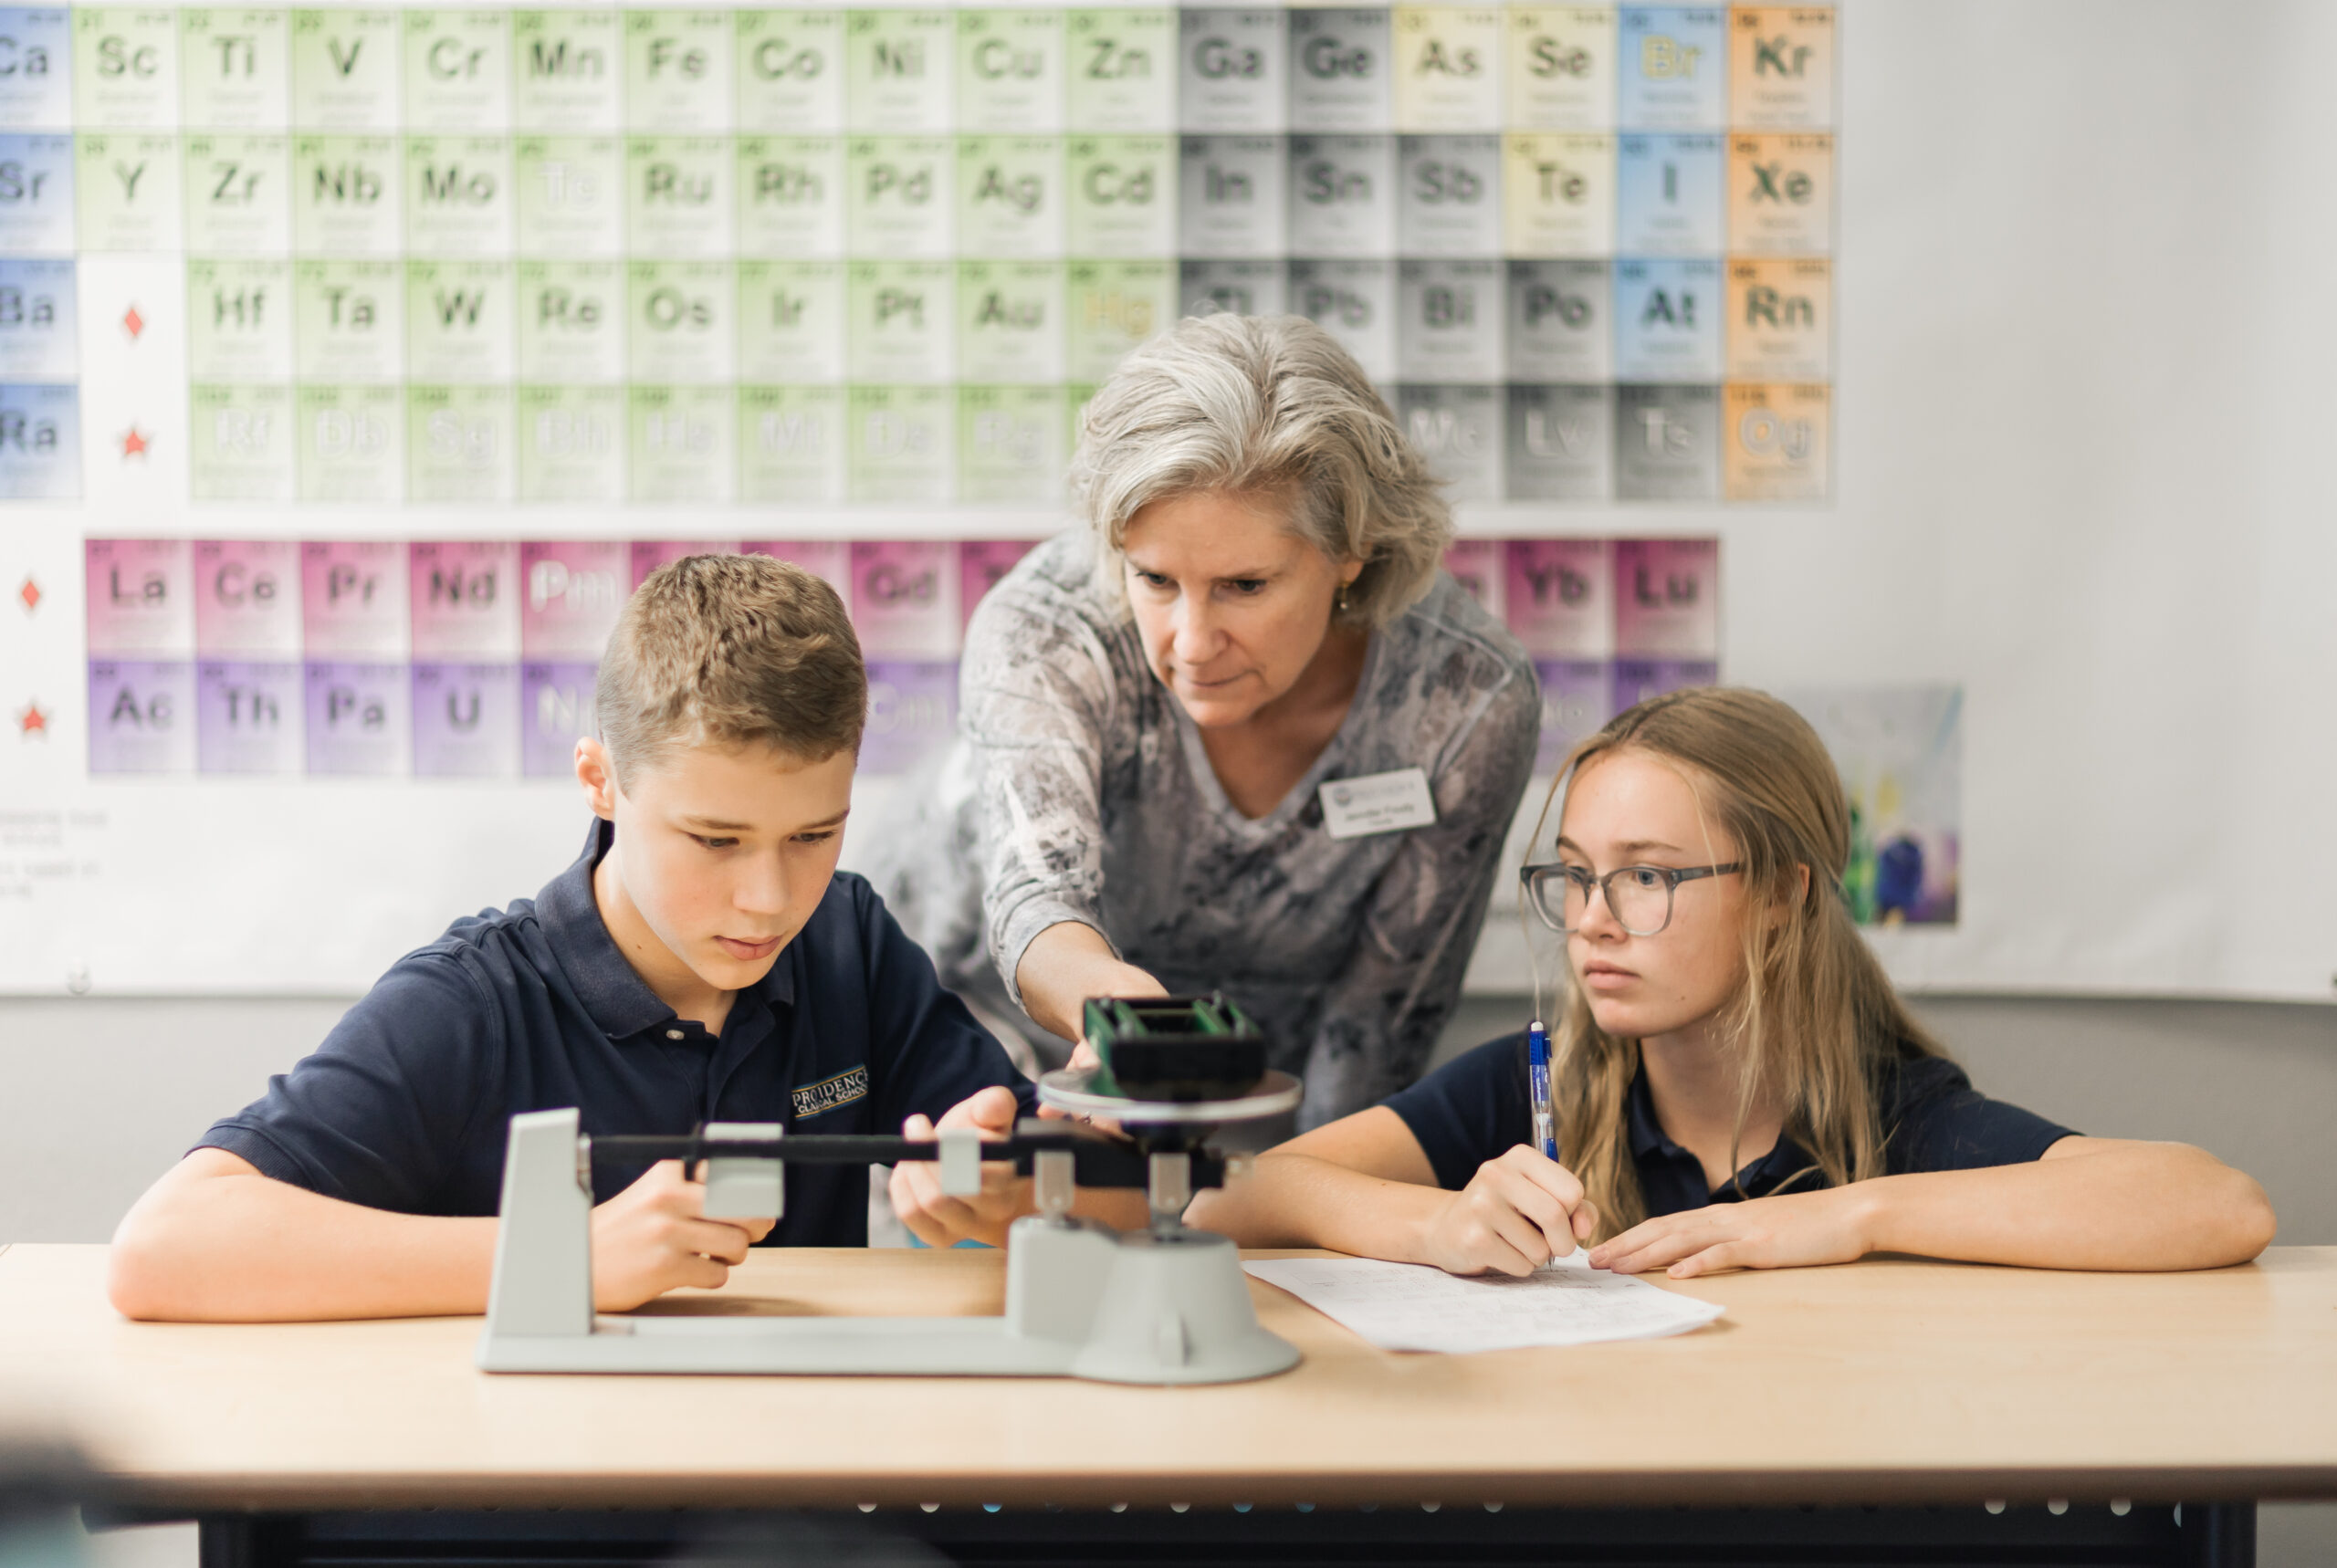 Physical Science students at Providence Classical School in Spring, TX, work with their teacher to measure the mass of an object using a scale.